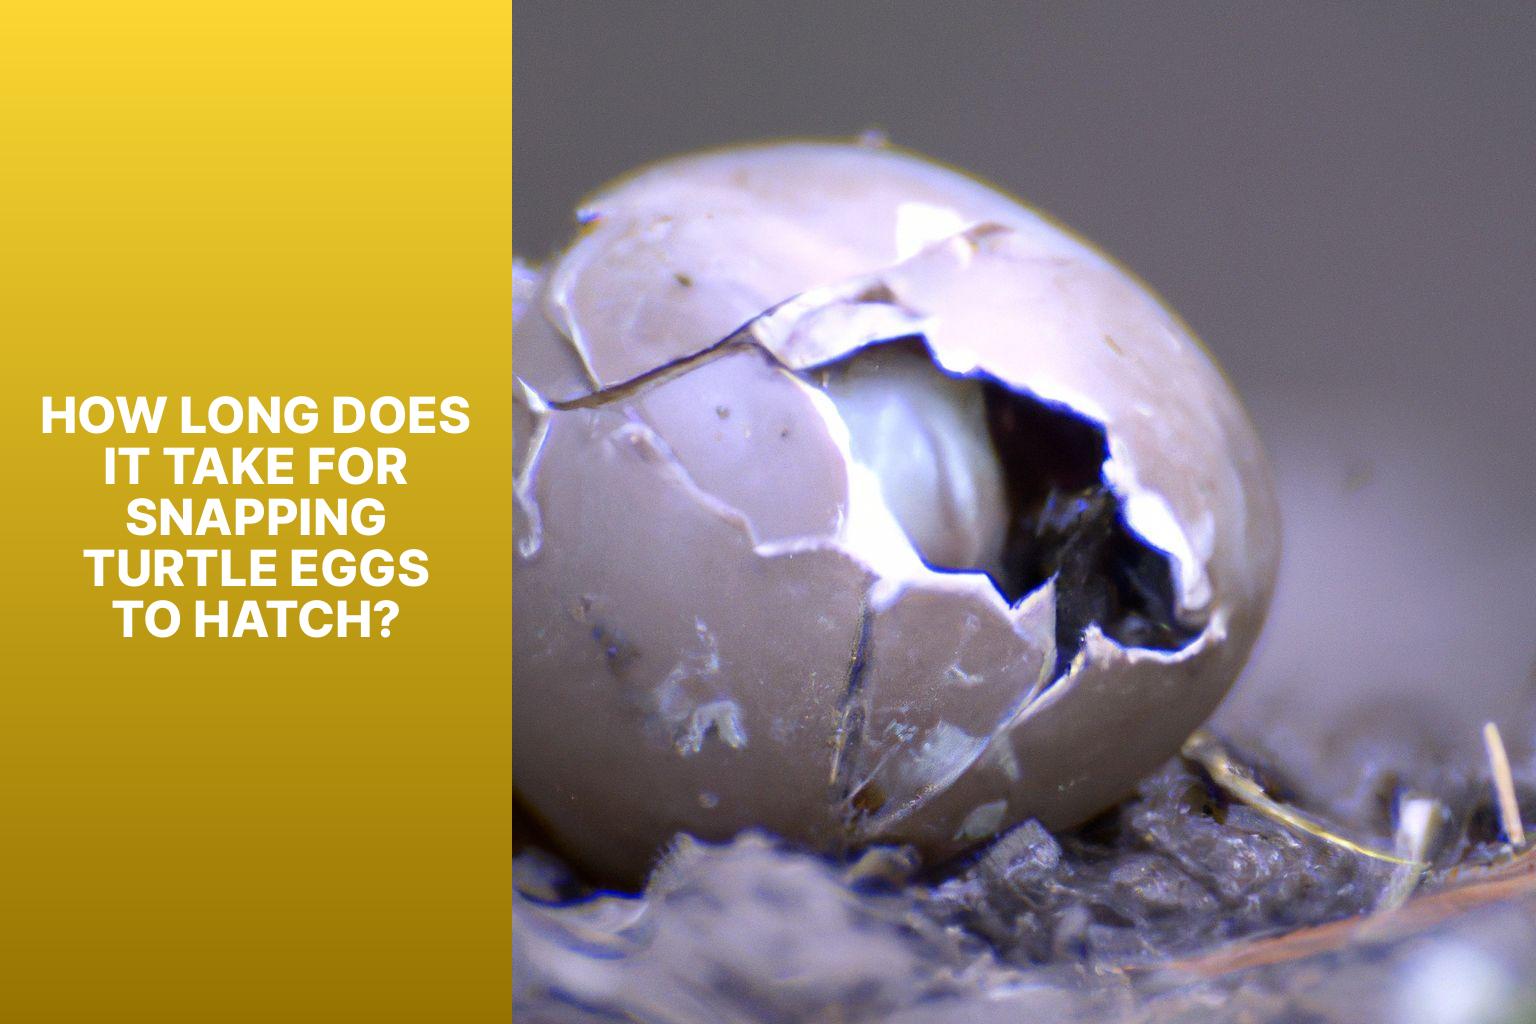 How Long Does It Take for Snapping Turtle Eggs to Hatch? - How Long Does It Take for Snapping Turtle Eggs to Hatch? 